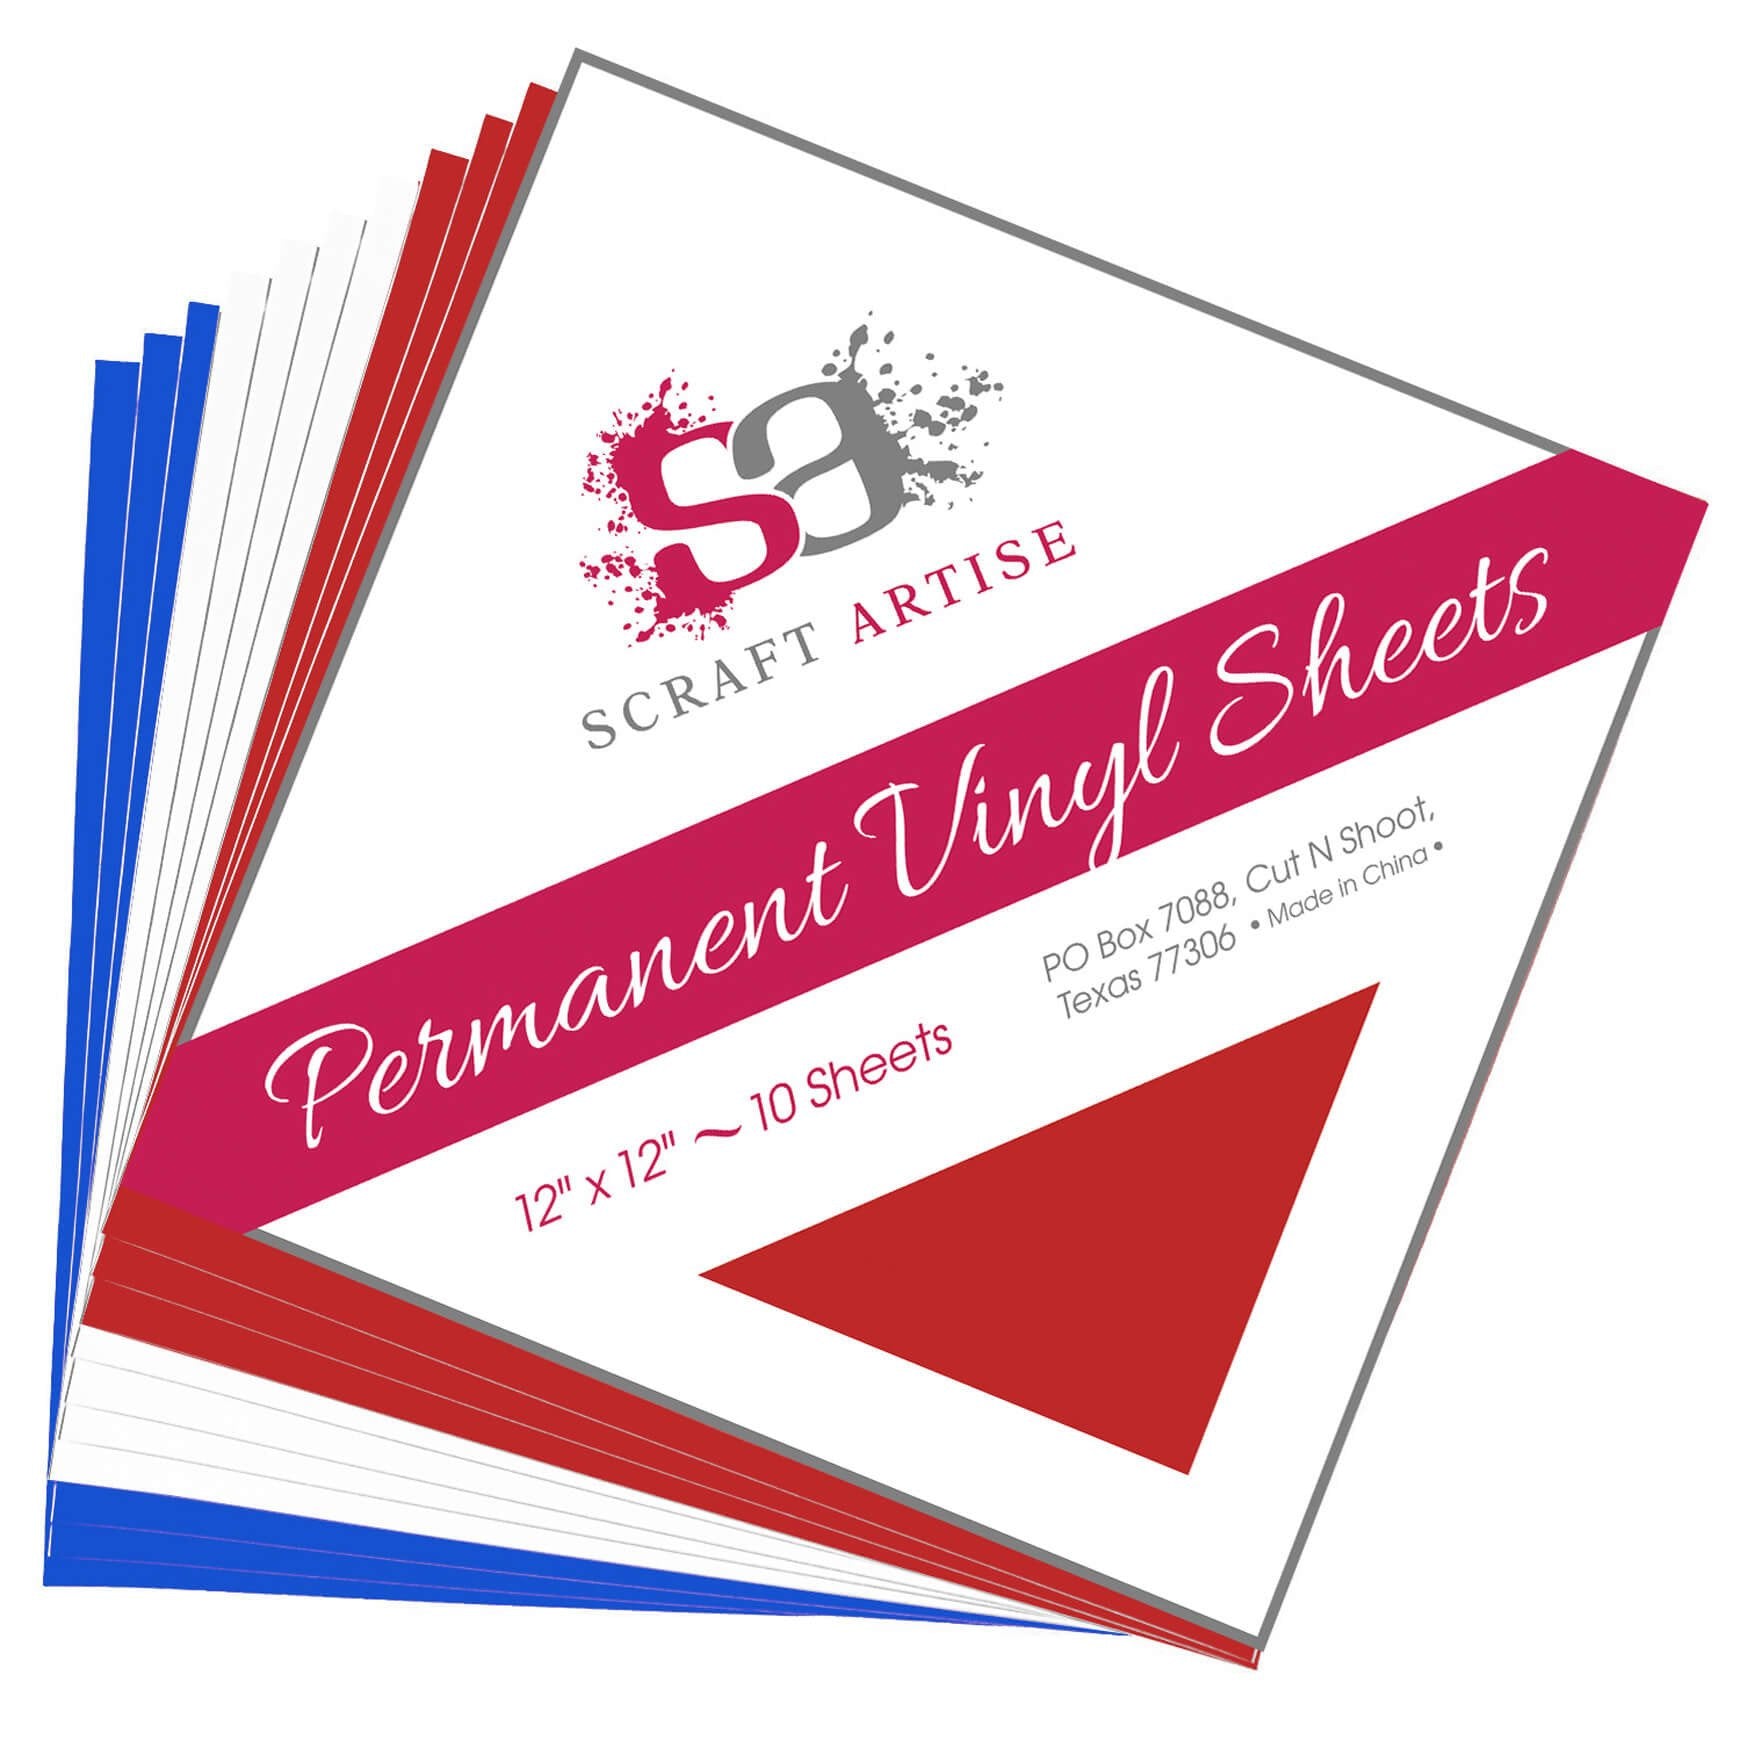 Scraft Artise Independence Matte Permanent Adhesive Craft Vinyl 12 x 12 Sheets - 10 Pack